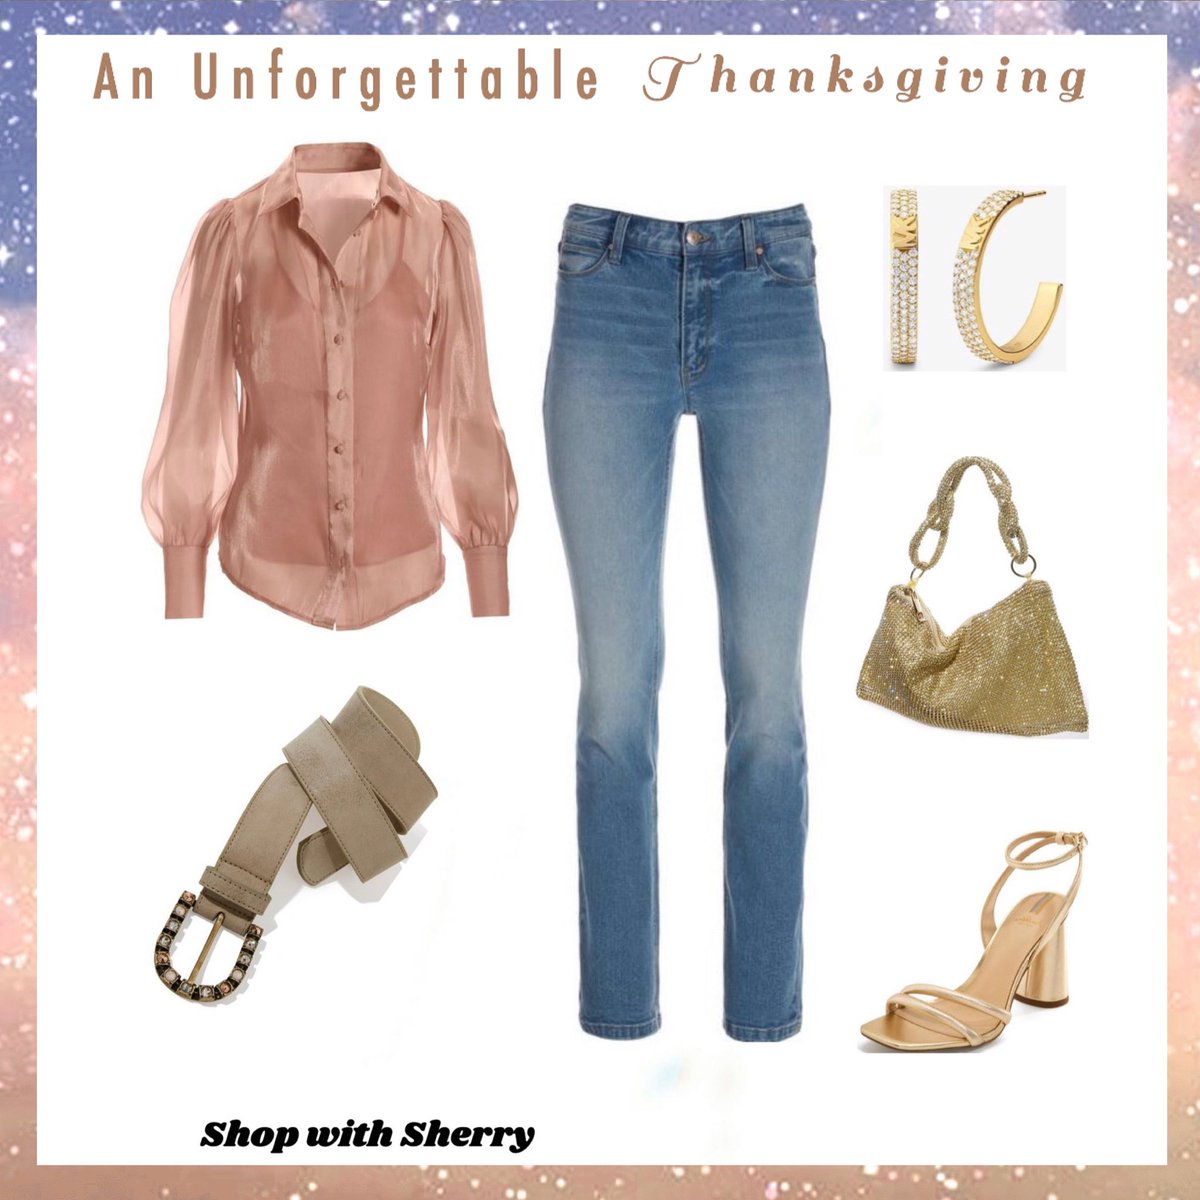 An Unforgettable Thanksgiving! As we approach this special holiday I wanted to put together a Casual Chic Ensemble. Find this LOOK by following this link: pinterest.com/gmasherry10/sh… | 🍽️ 🍾🥂🥧.
#thanksgivingstyle #casualchicstyles #straightlegjeans #organzablouses #shopwithsherry